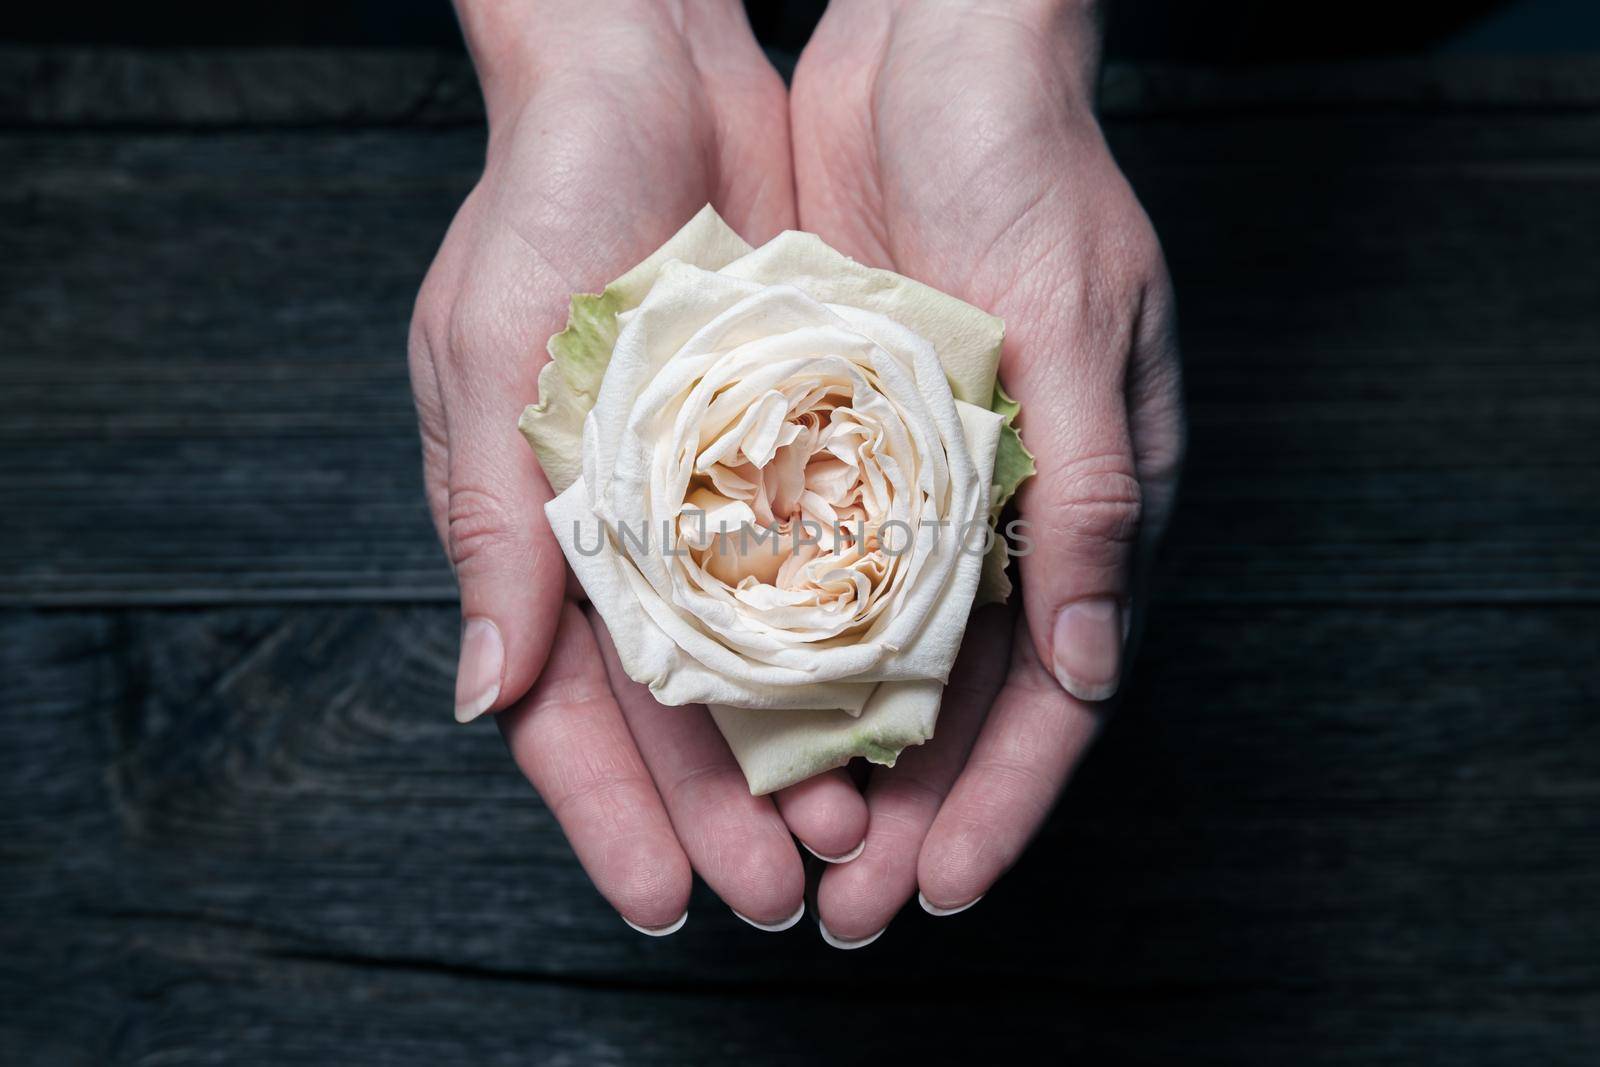 Women's hands hold a white rose bud.